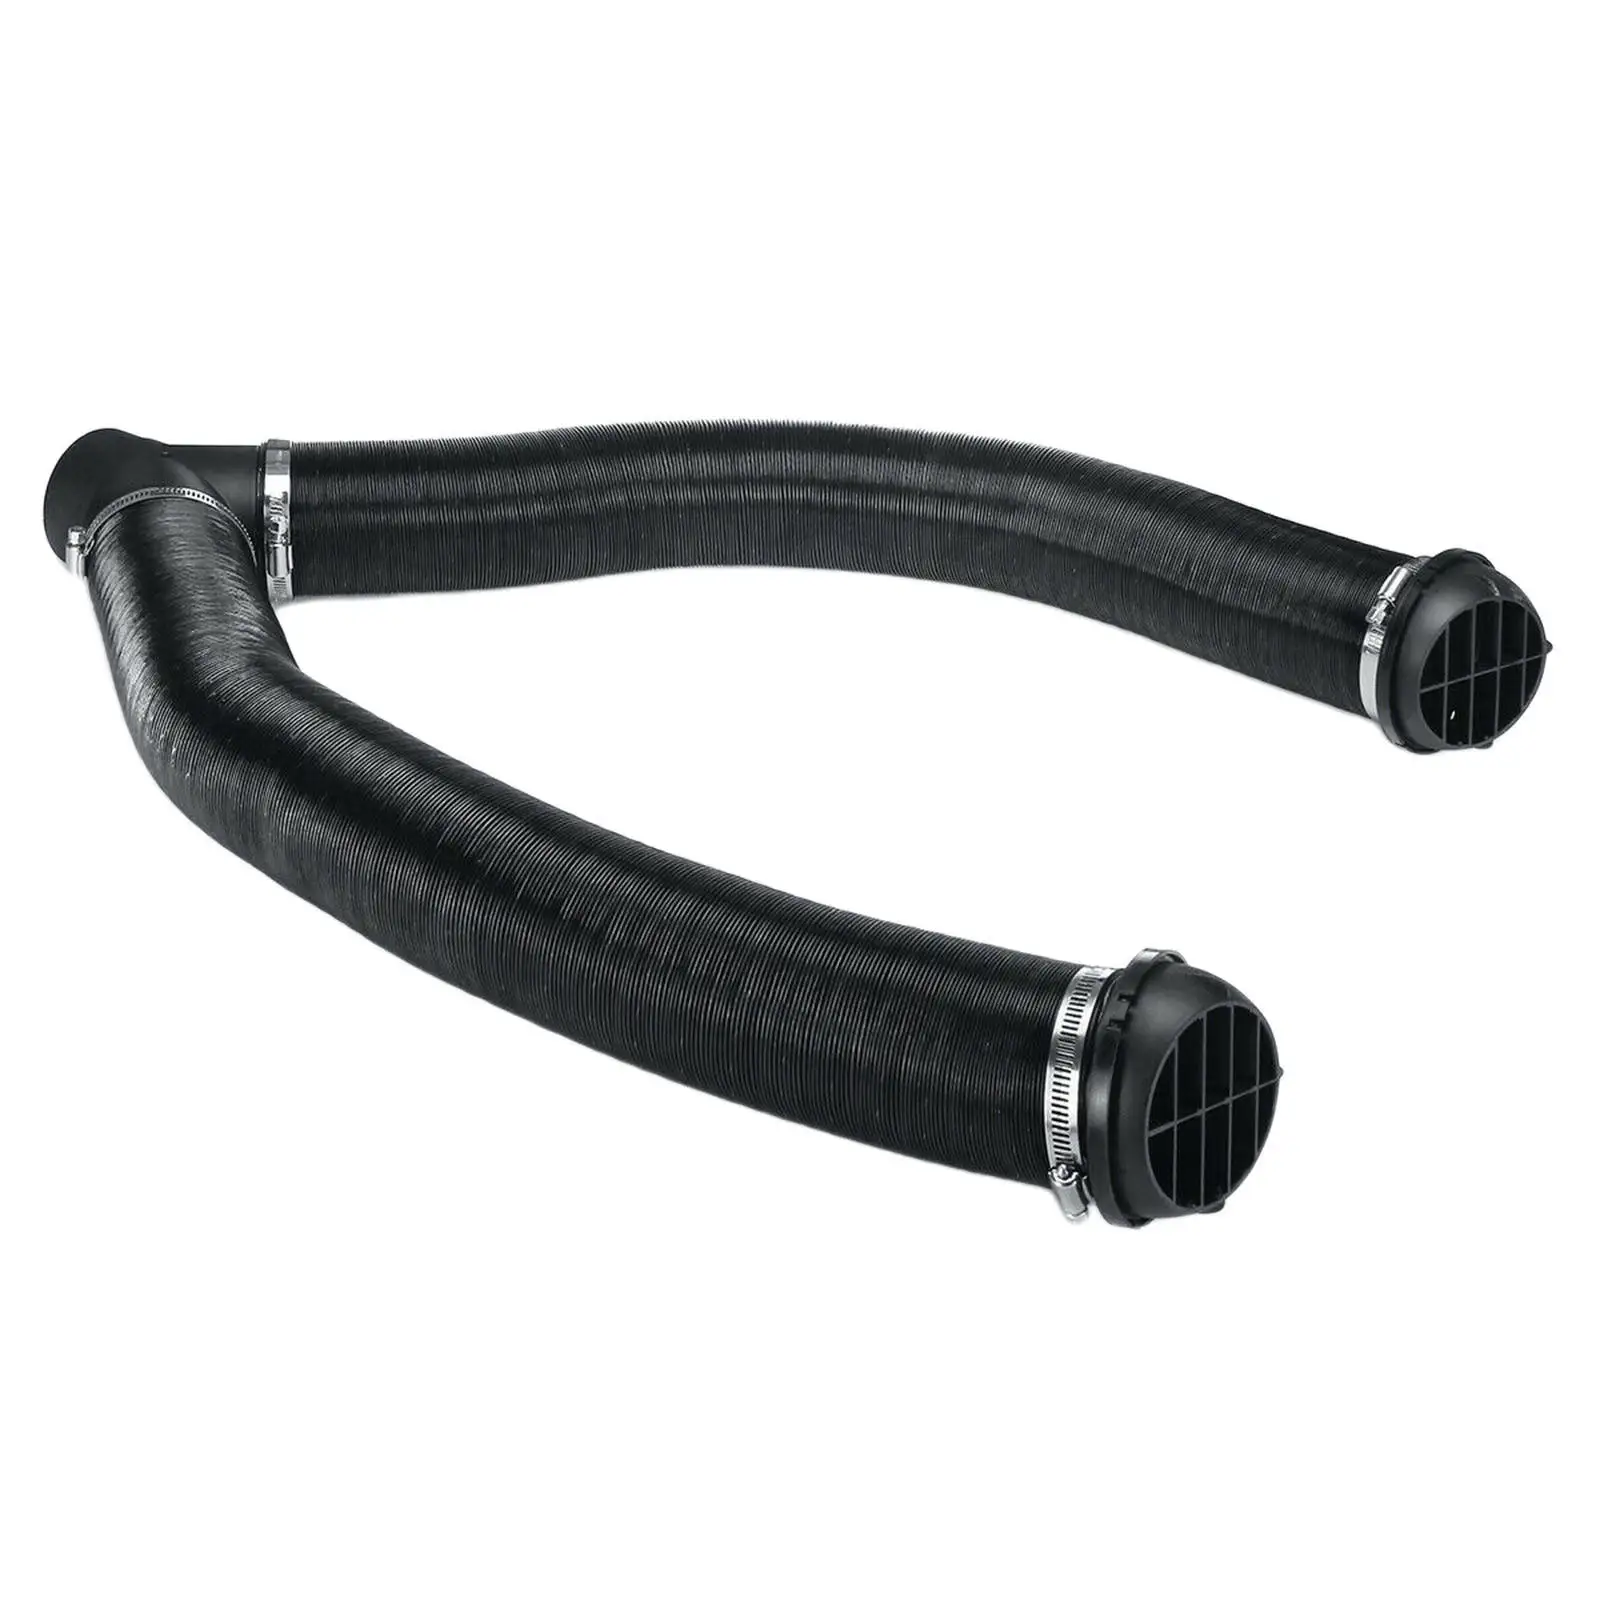 75mm Car Heater Pipe Duct + Car Heater Air Outlet+ Ducting Y Branch + Hose Clip for Parking Heater Replacement